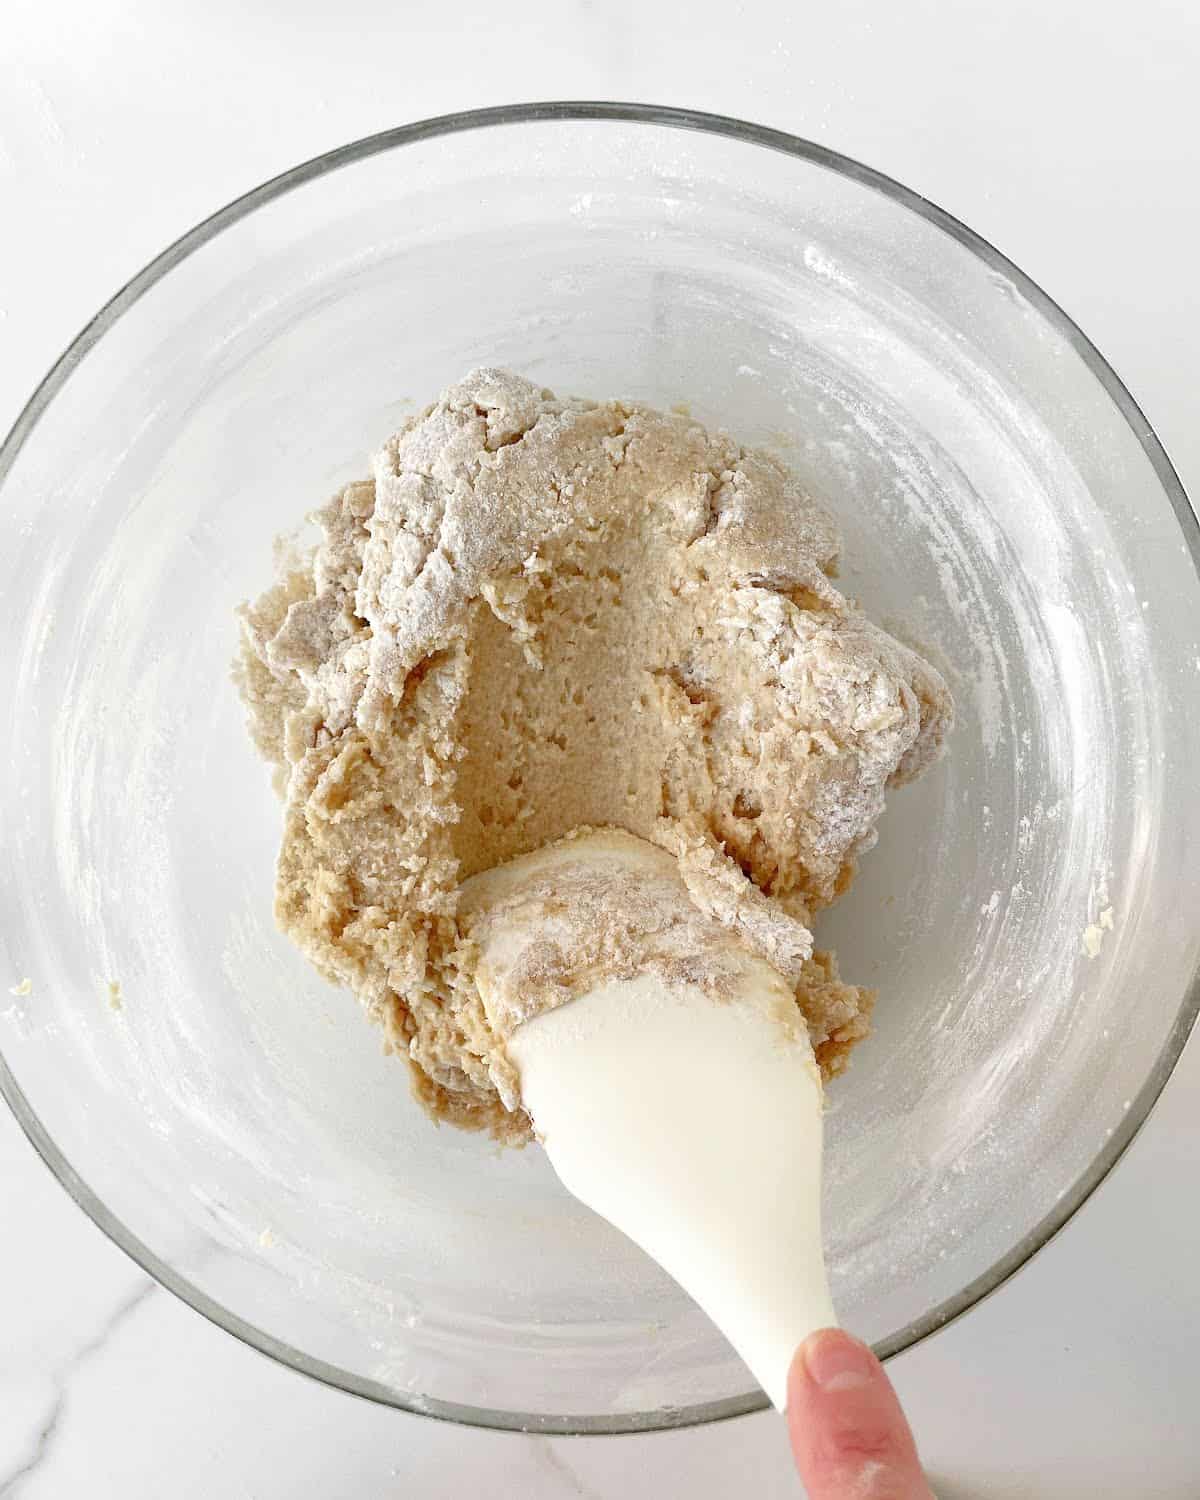 Flour being incorporated into cookie dough mixture with a white spatula in a glass bowl on white marble.